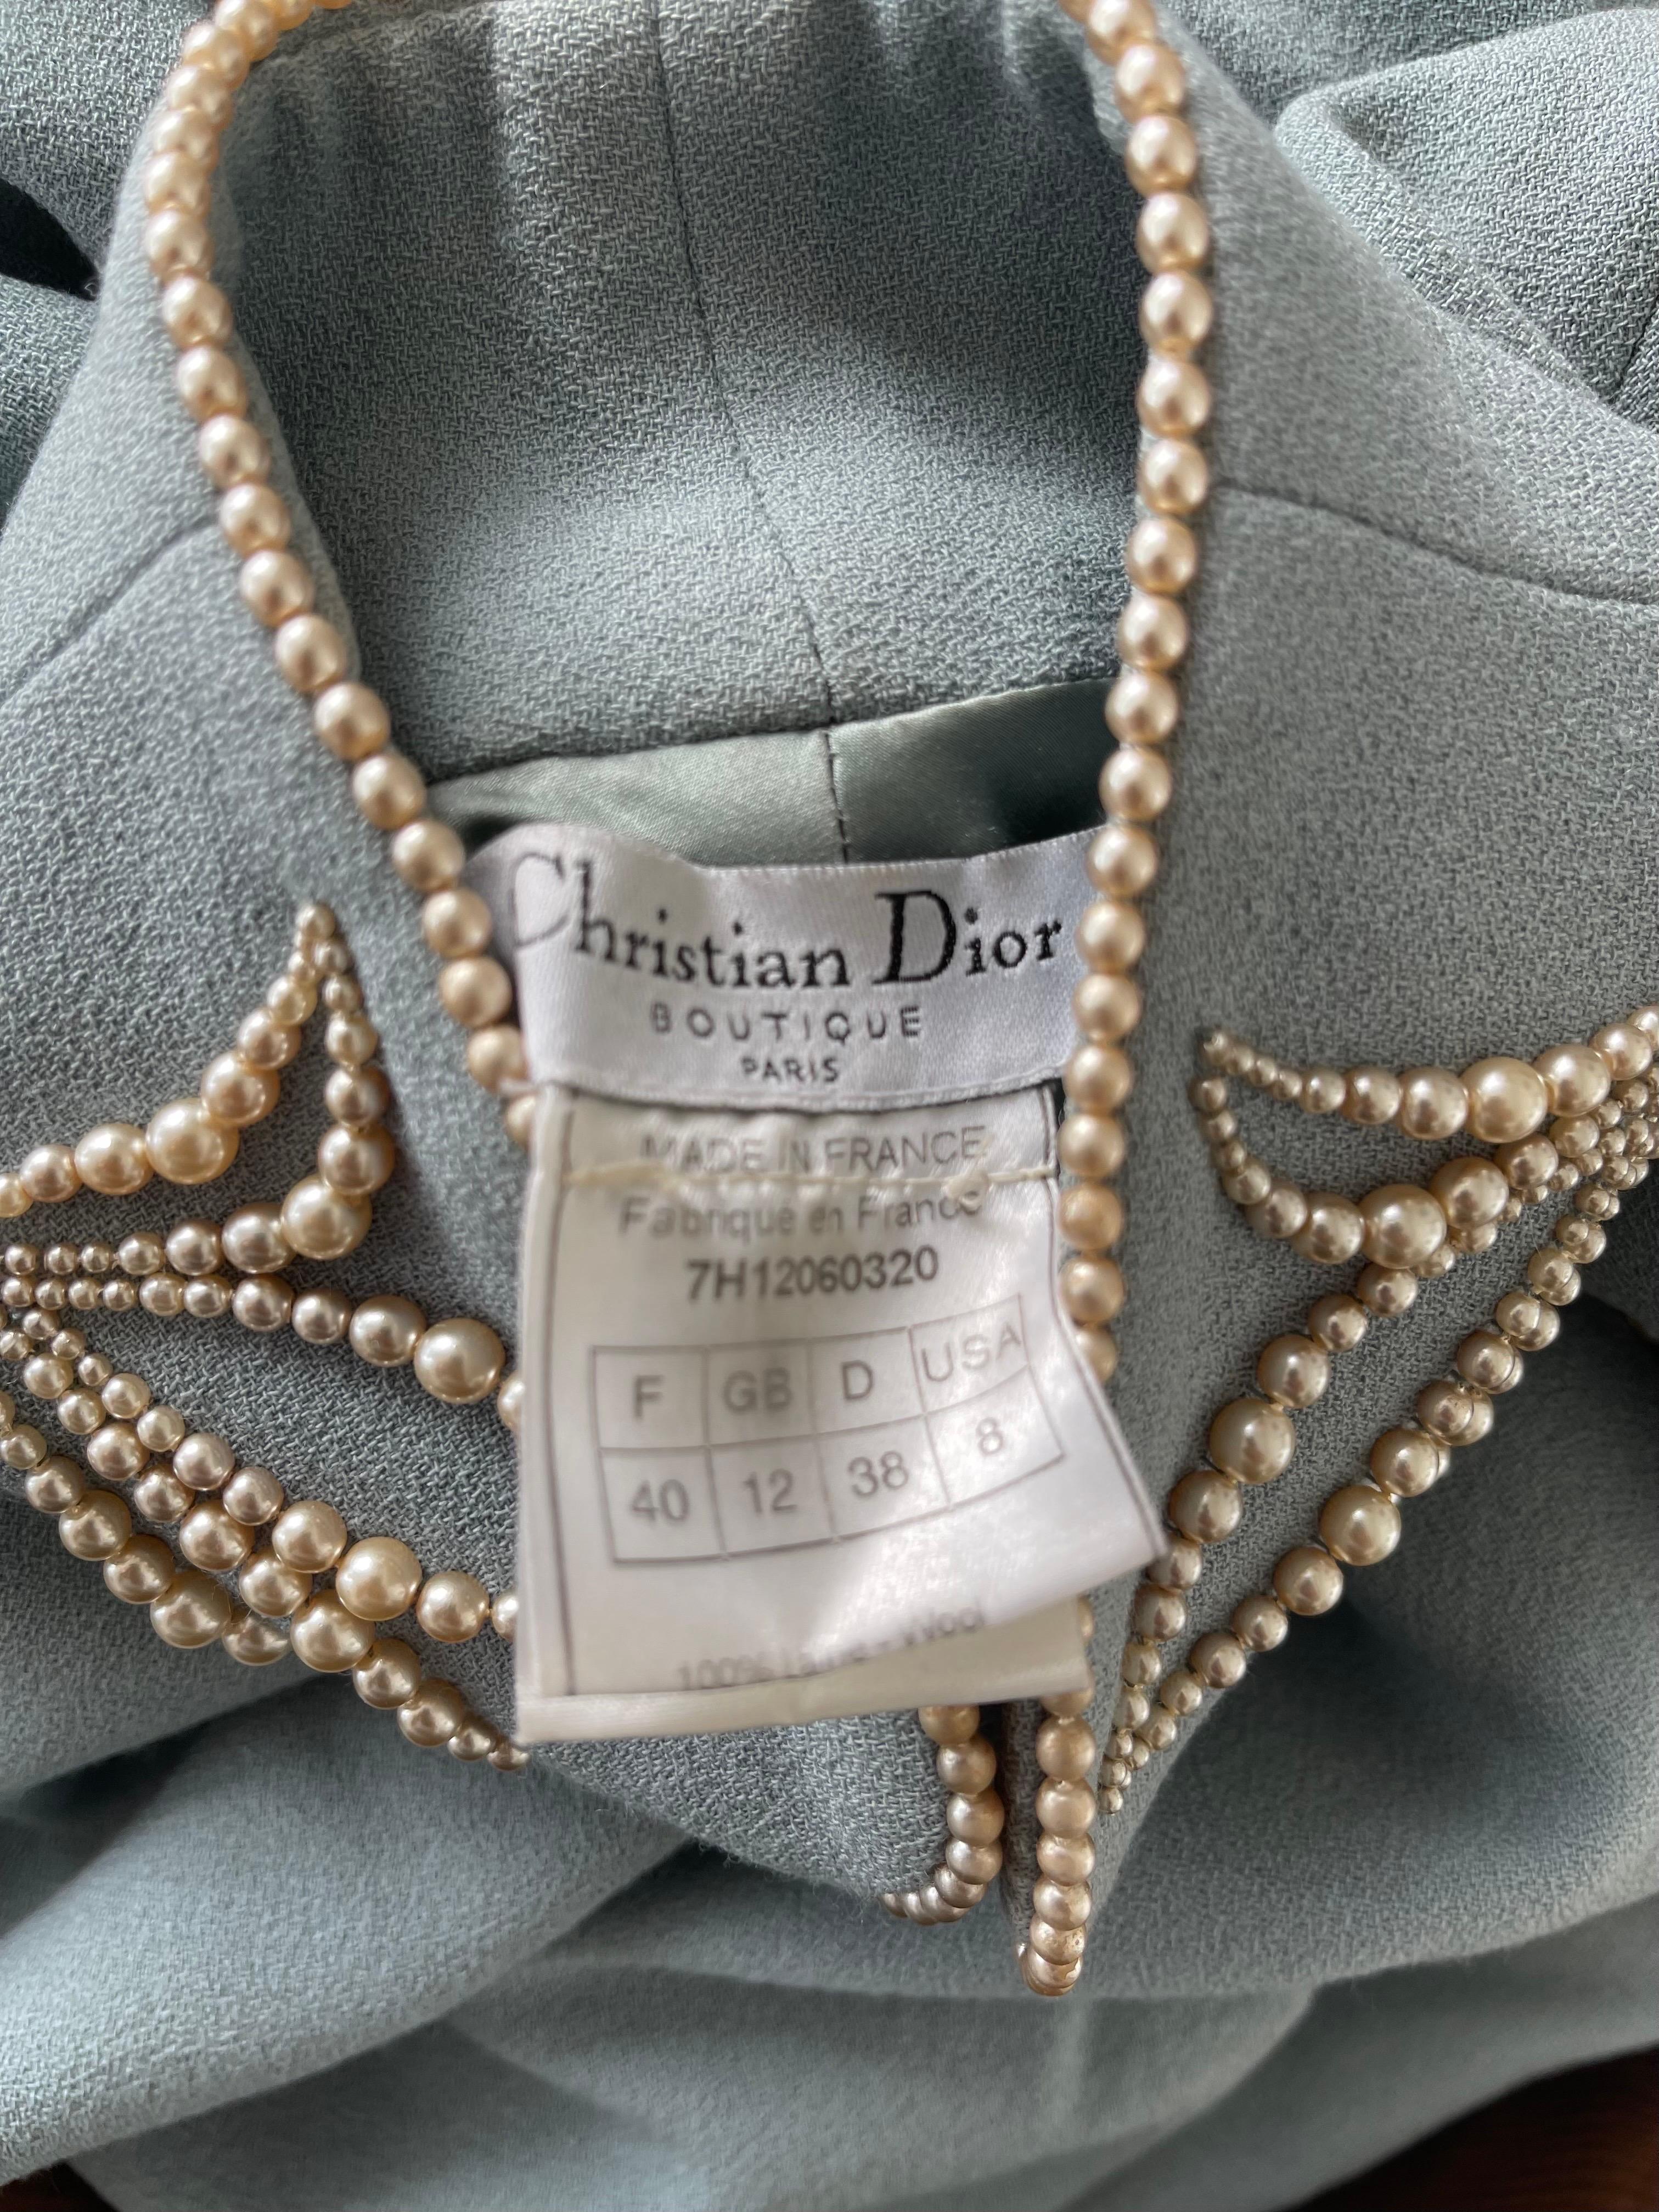 Documented CHRISTIAN DIOR by JOHN GALLIANO A / W 1997 light blue vintage cheongsam style dress ! Features a soft lightweight wool with a luxurious silk lining. Pearl buttons up the side that lead across the bust, ending at the neck. 
This is a